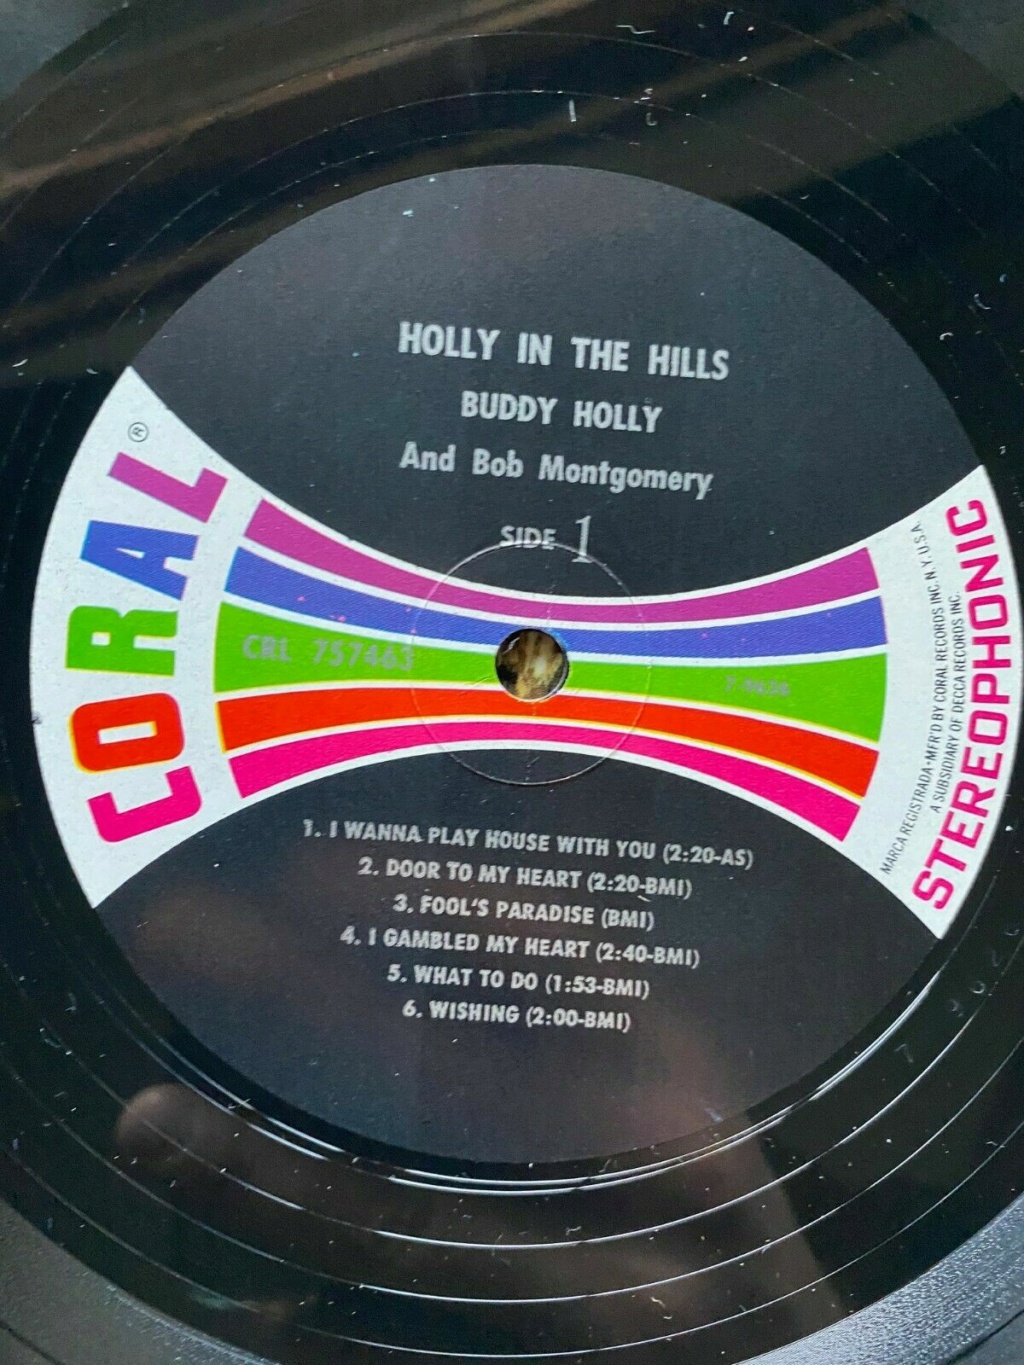 Buddy Holly - LP in the Hills - Coral records Hollyh12